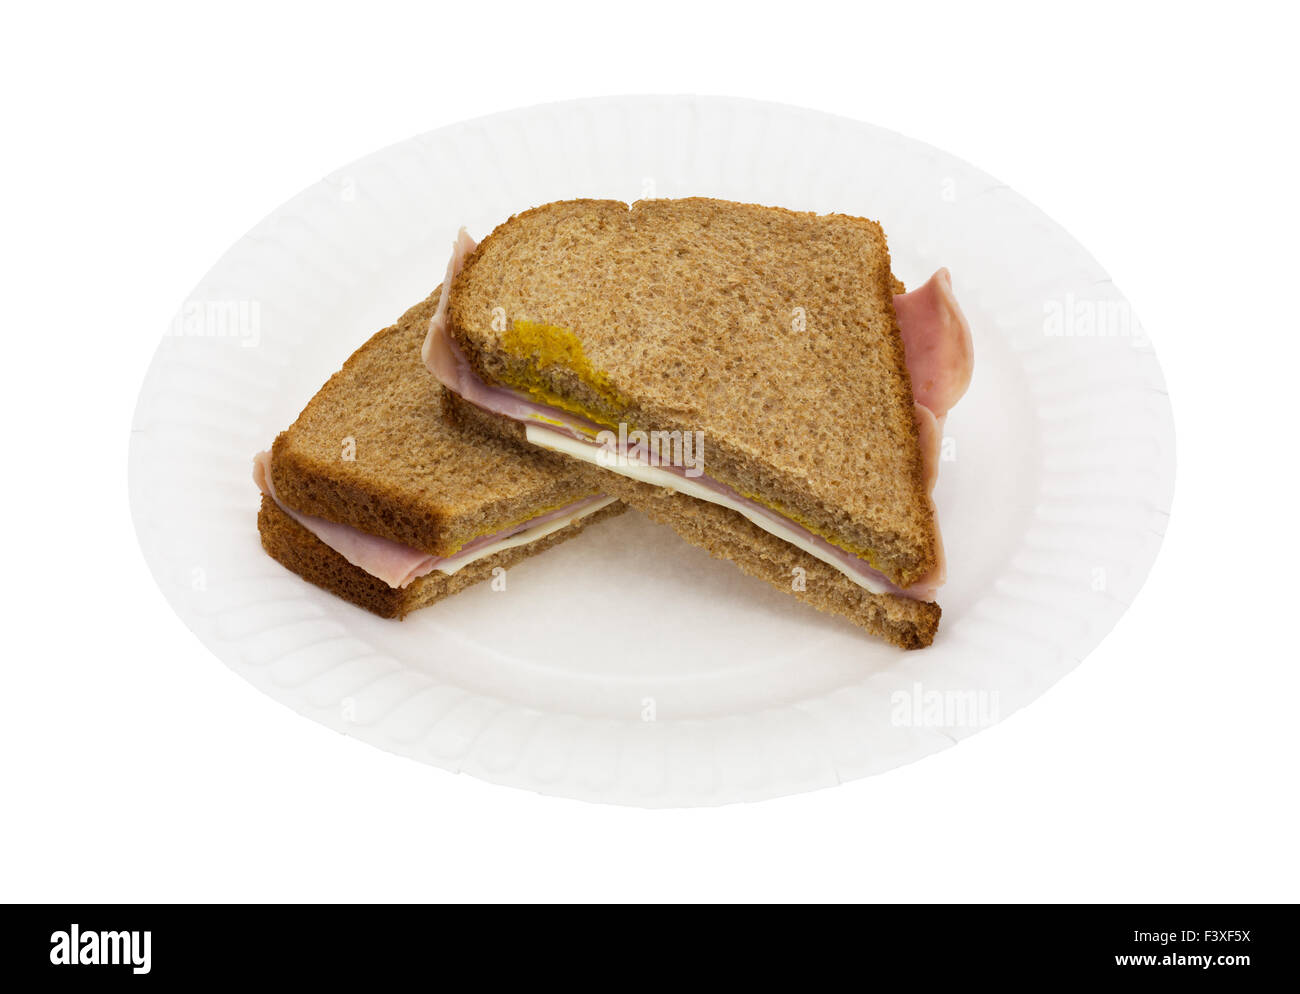 A ham and cheese sandwich that has been cut in half on a white paper plate atop a white background. Stock Photo